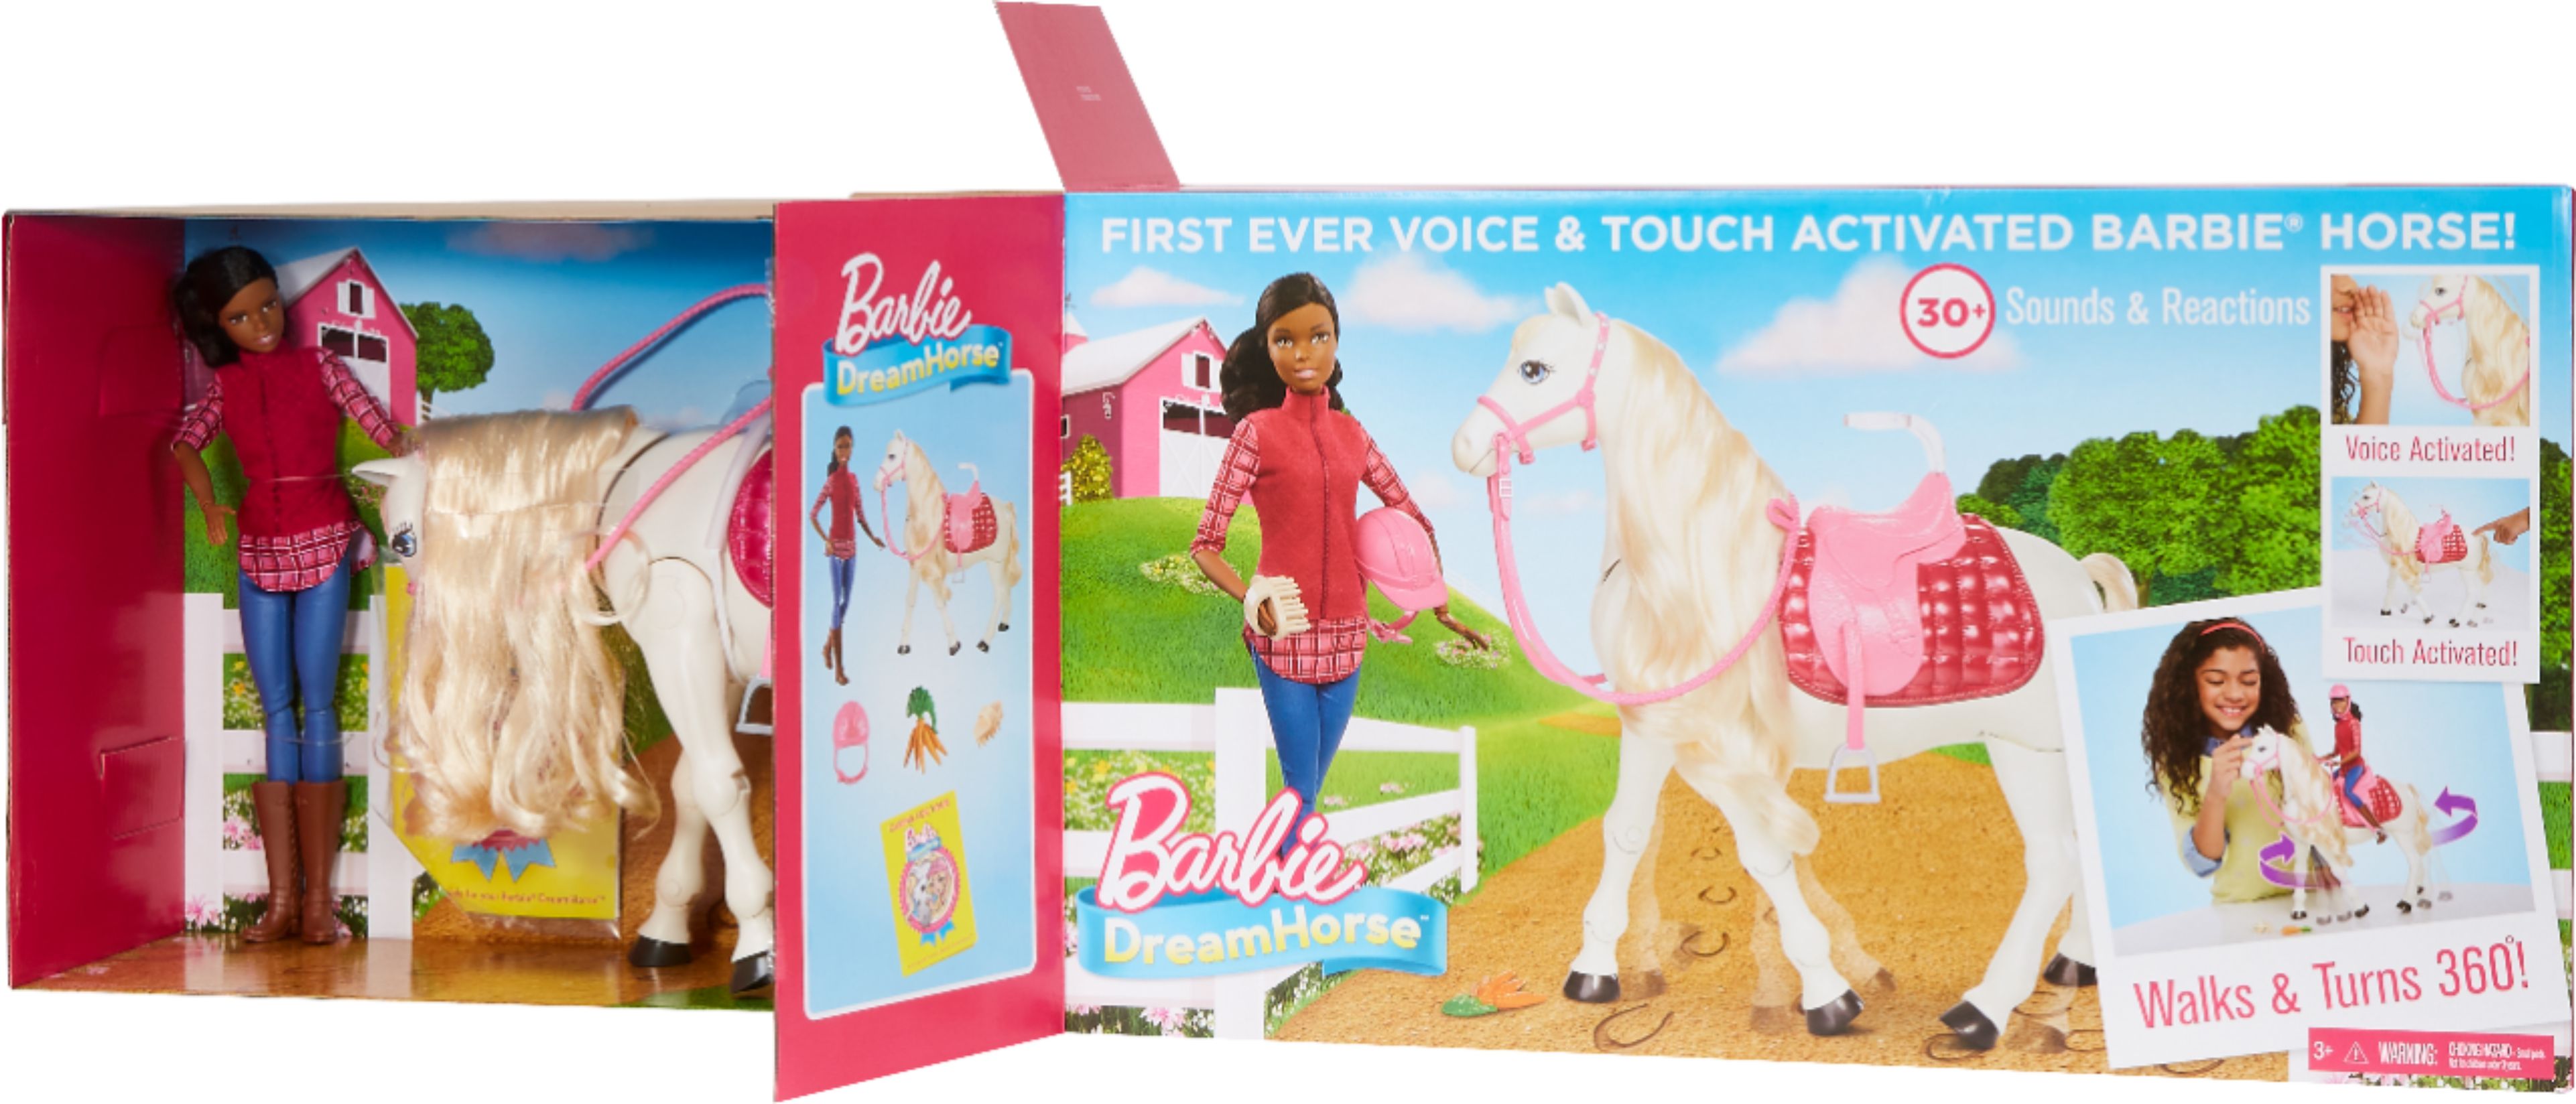 barbie dream horse with doll